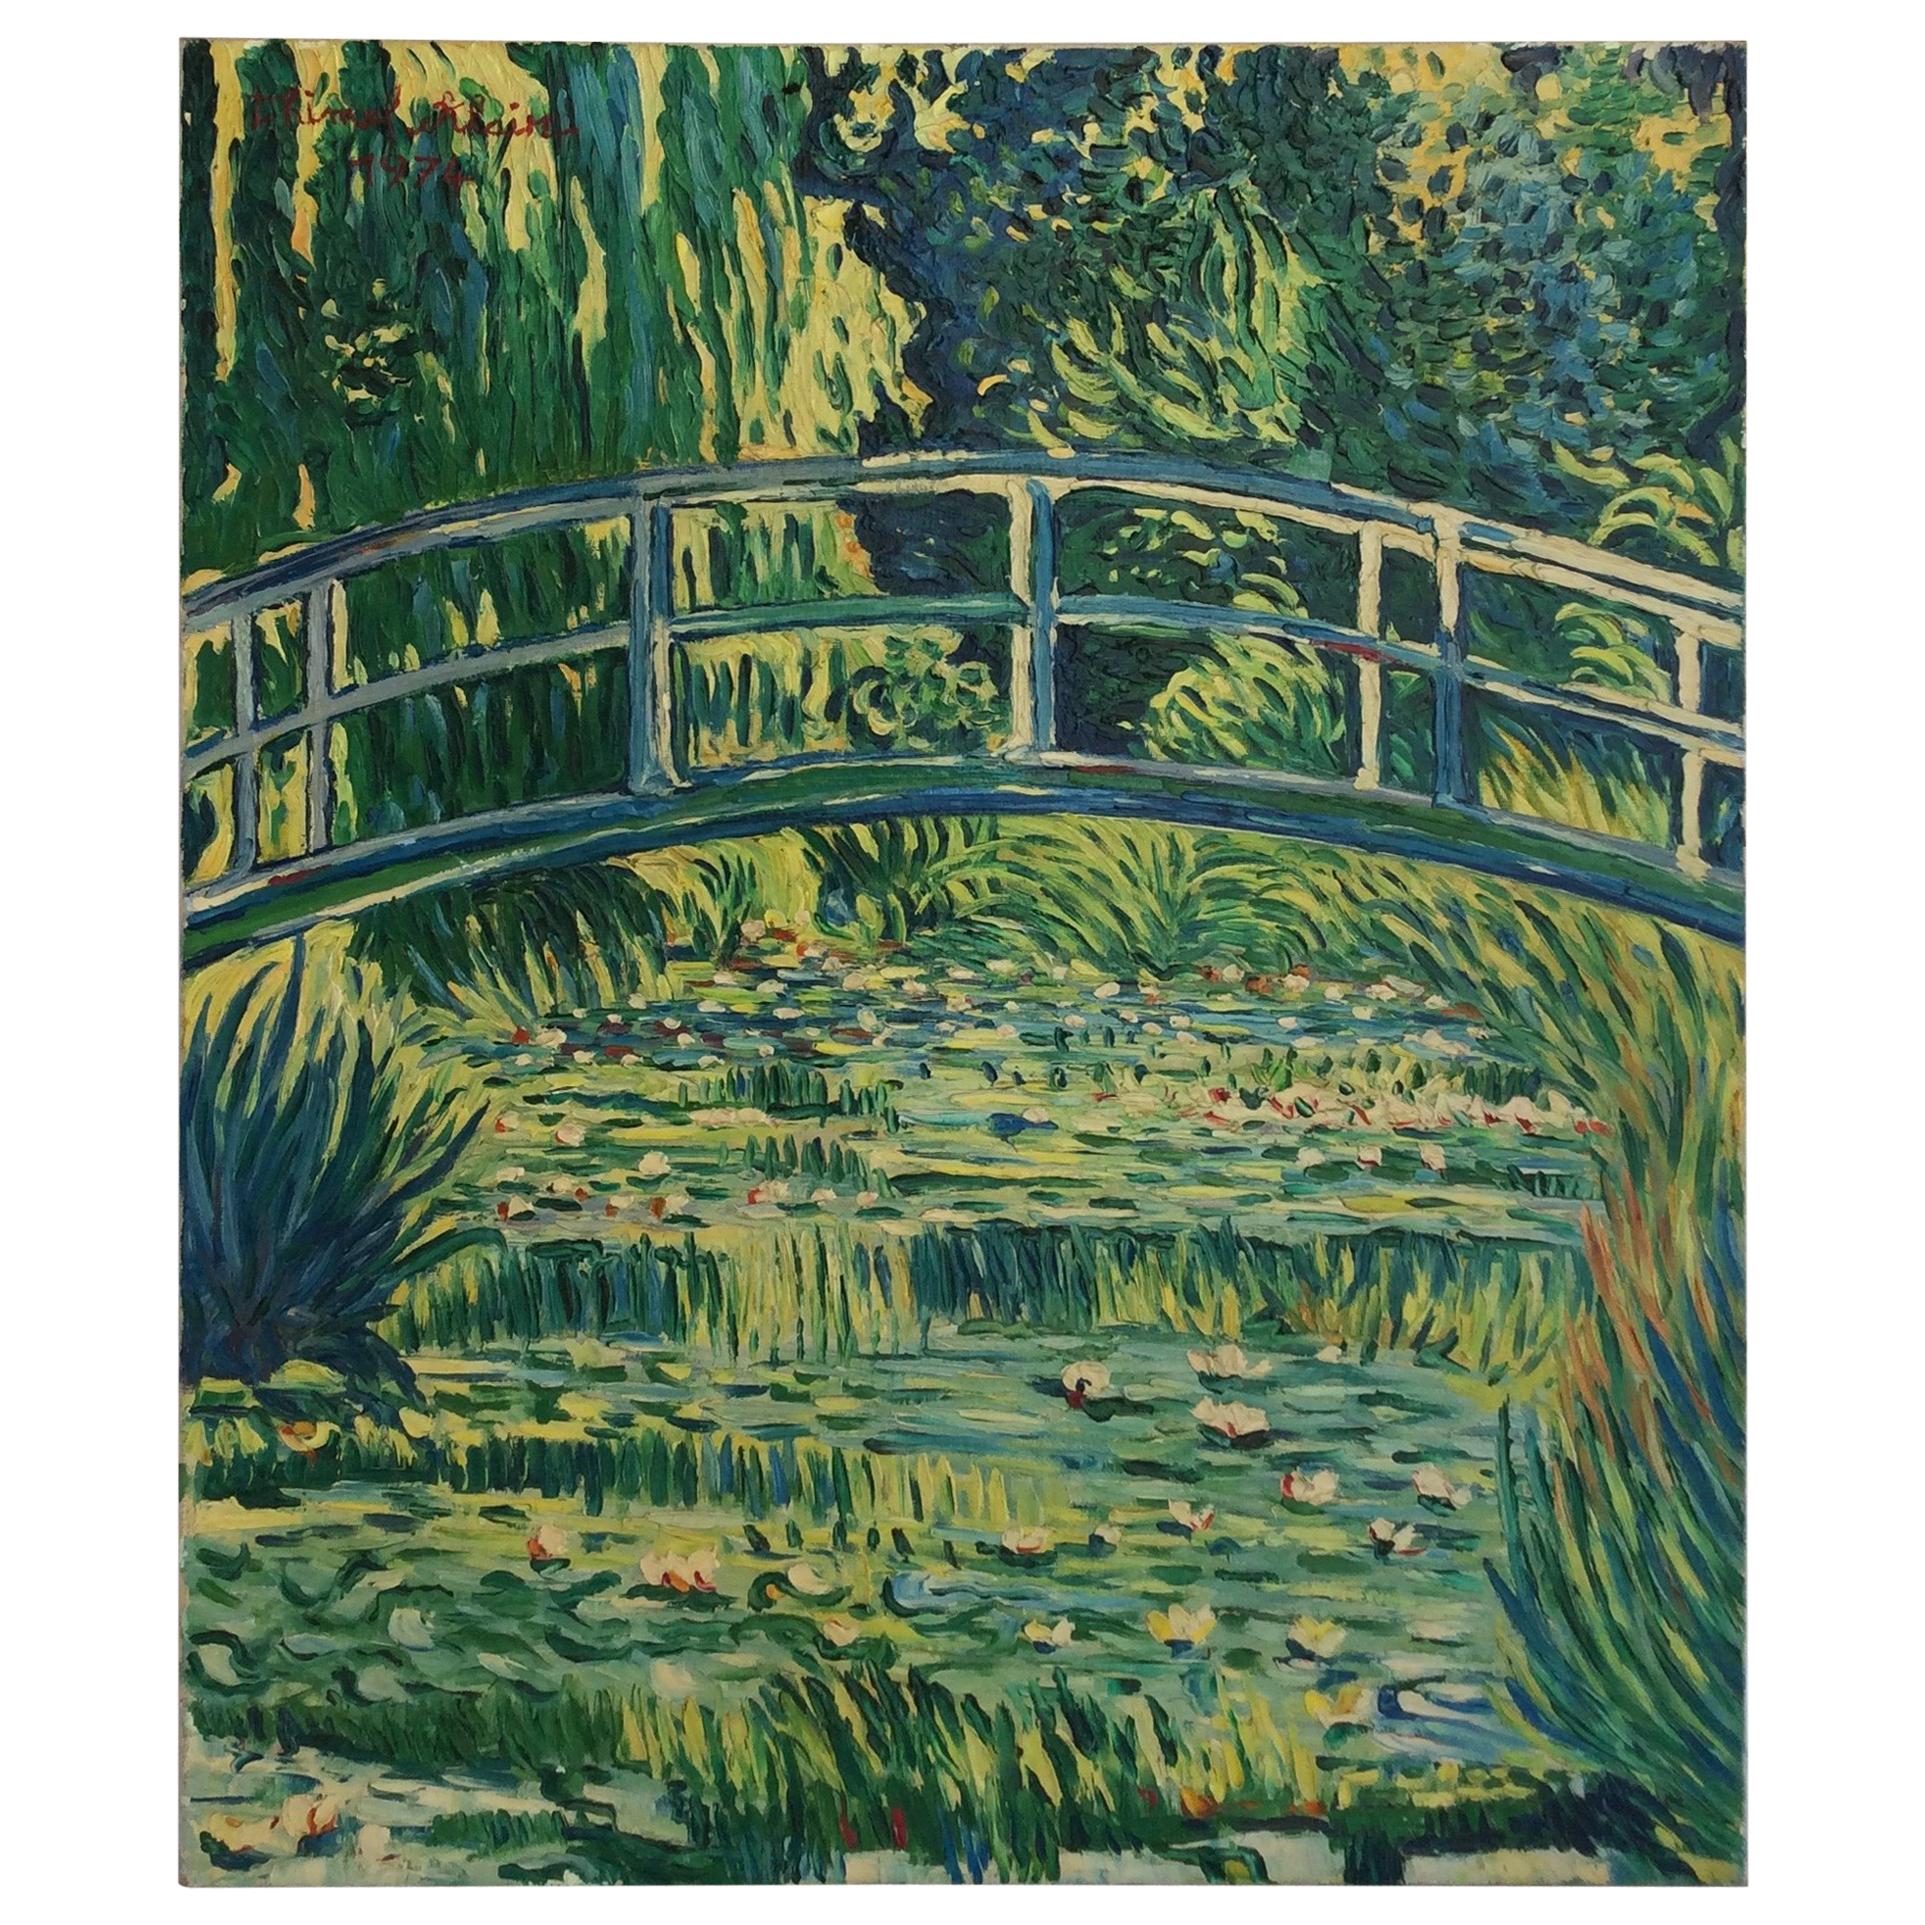 French Post Impressionist Painting After Monet Water Lillies by Alain Thimel